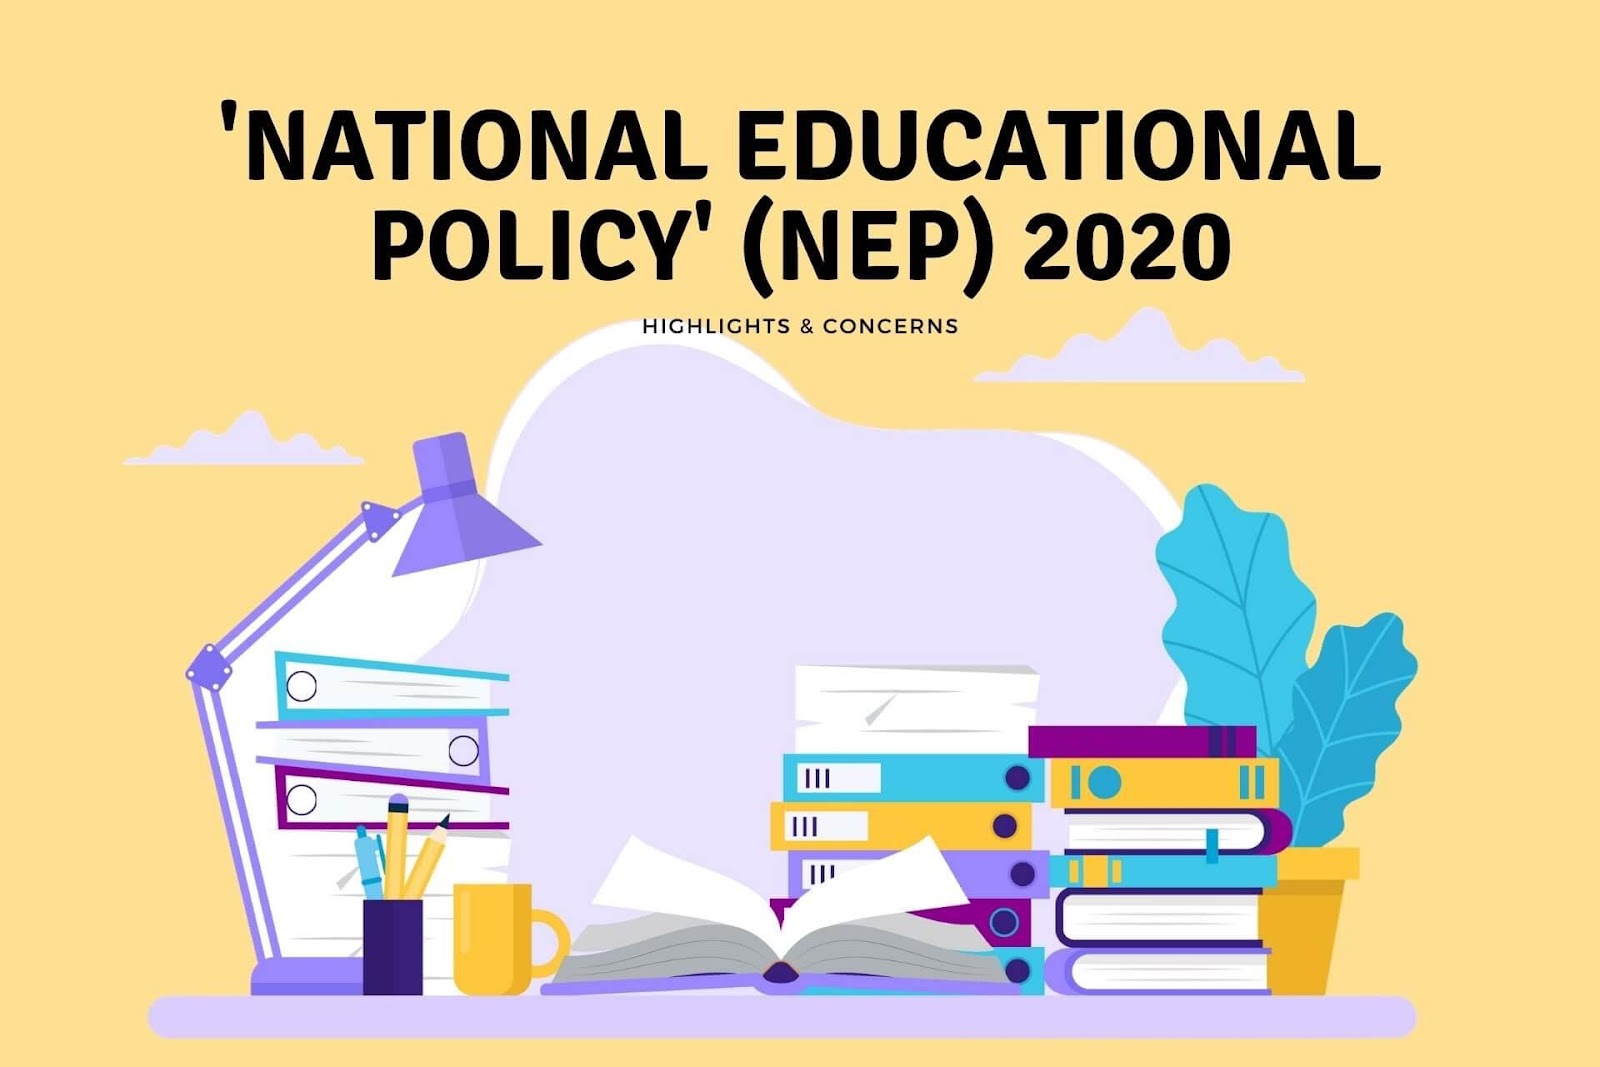 The New 'National Educational Policy' (NEP) 2020 - Highlights & Concerns